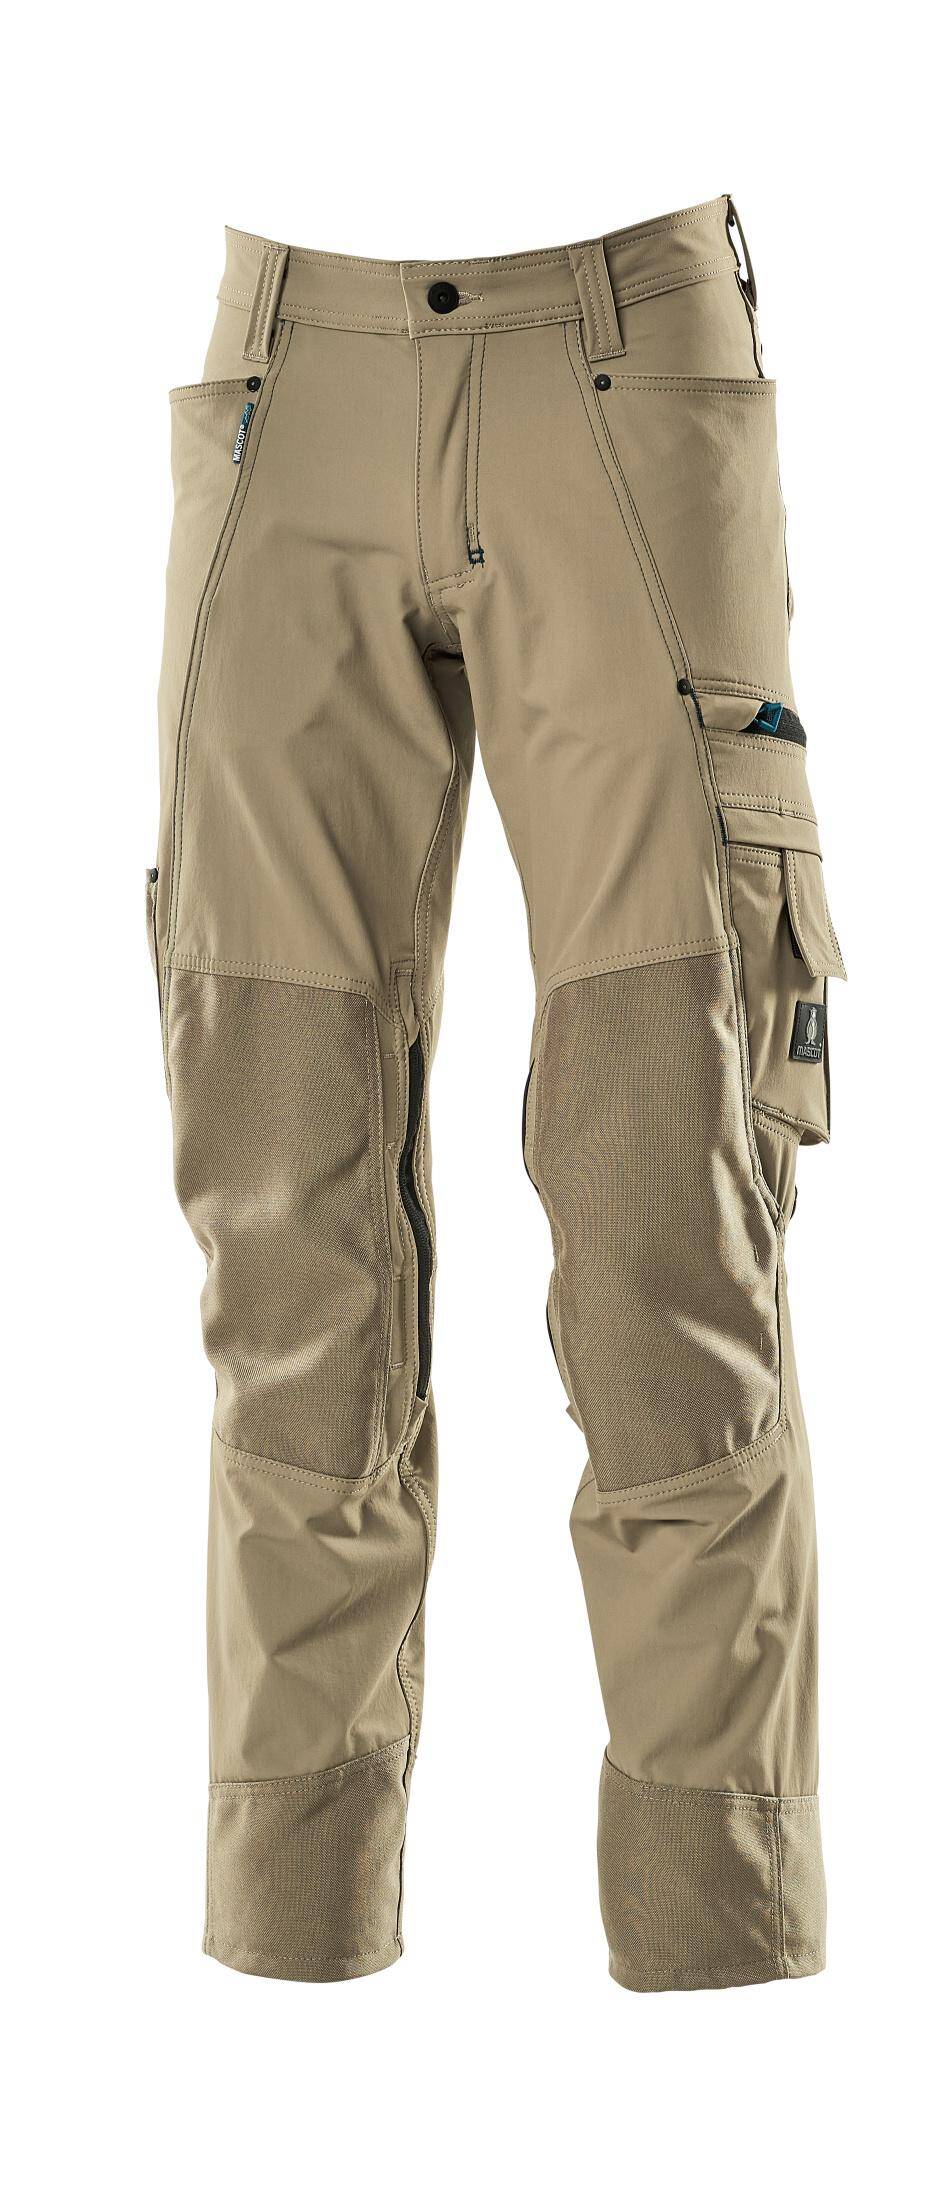 Trousers with kneepad pockets Advanced sand